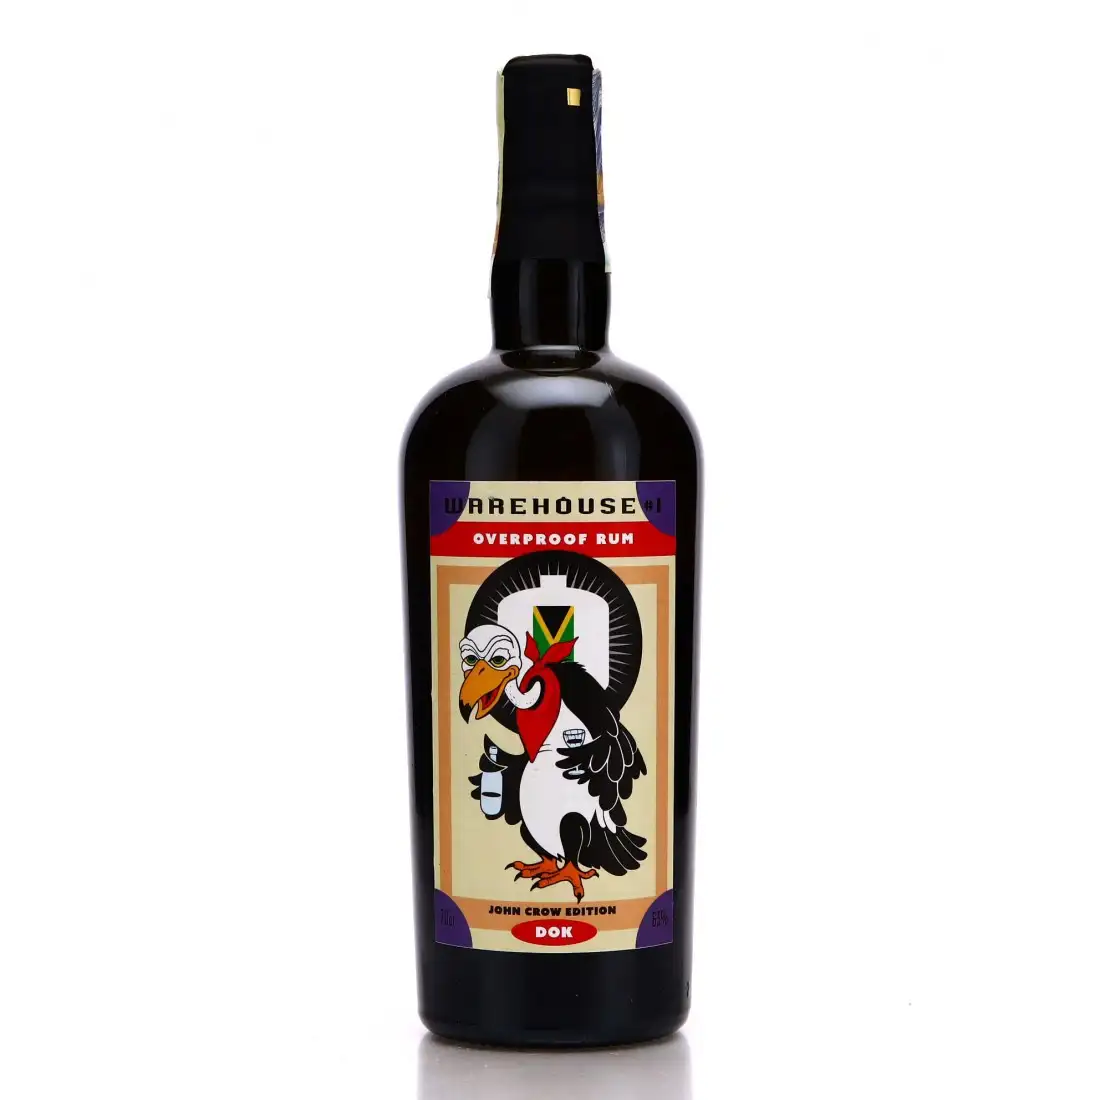 Image of the front of the bottle of the rum Overproof Rum John Crow Edition DOK